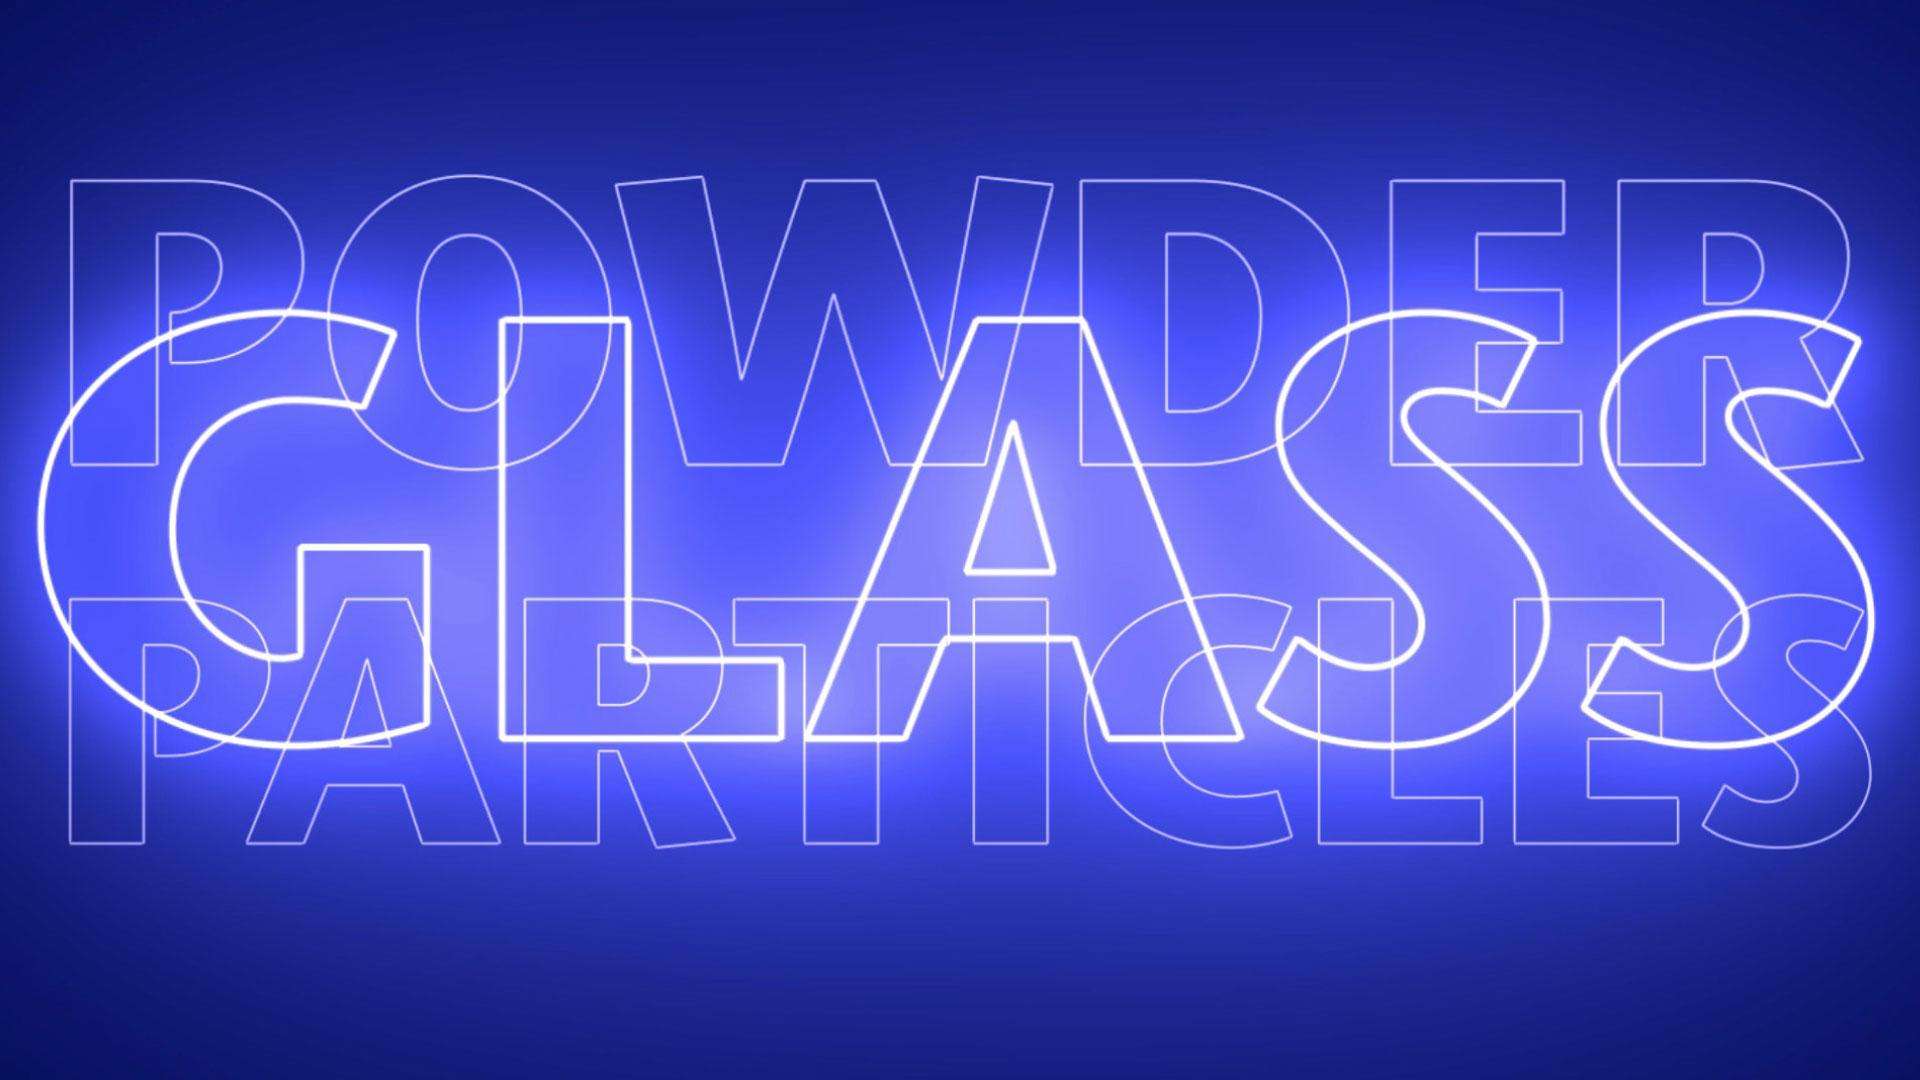 Video showing the functions and applications of glass powder